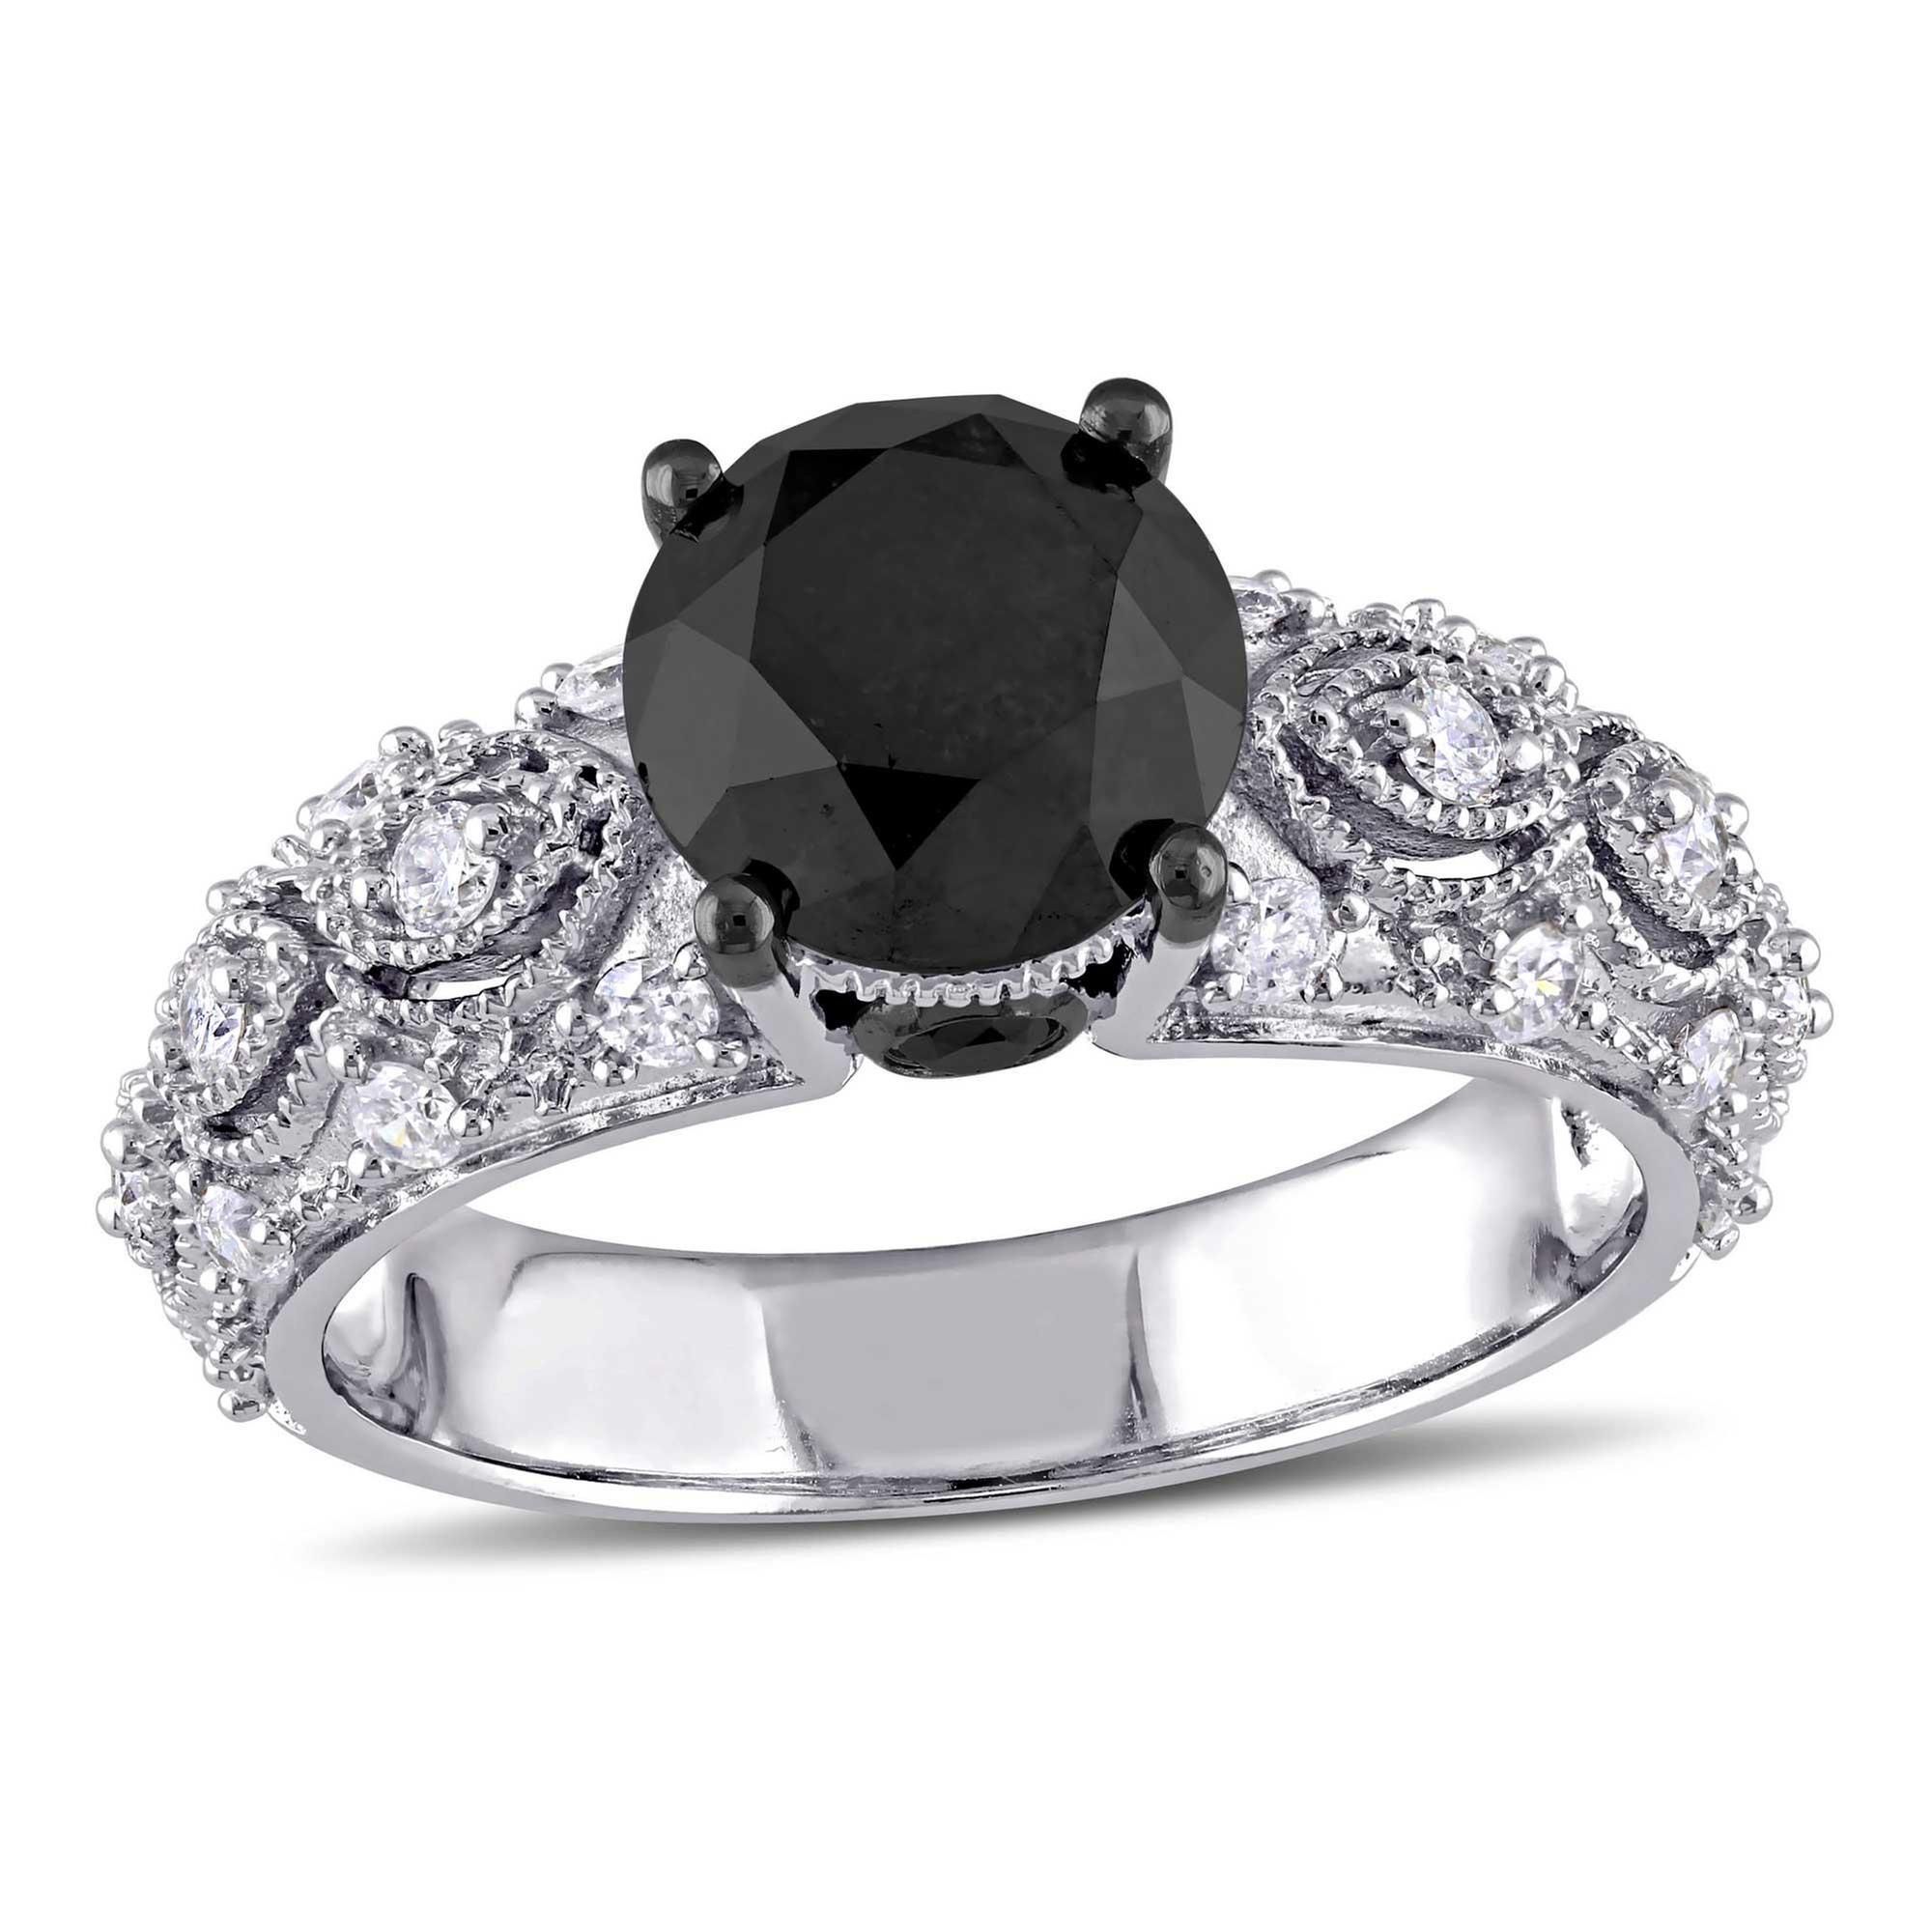 3ctw Black Diamond and Diamond Vintage-Inspired Engagement Ring - Size 8.5